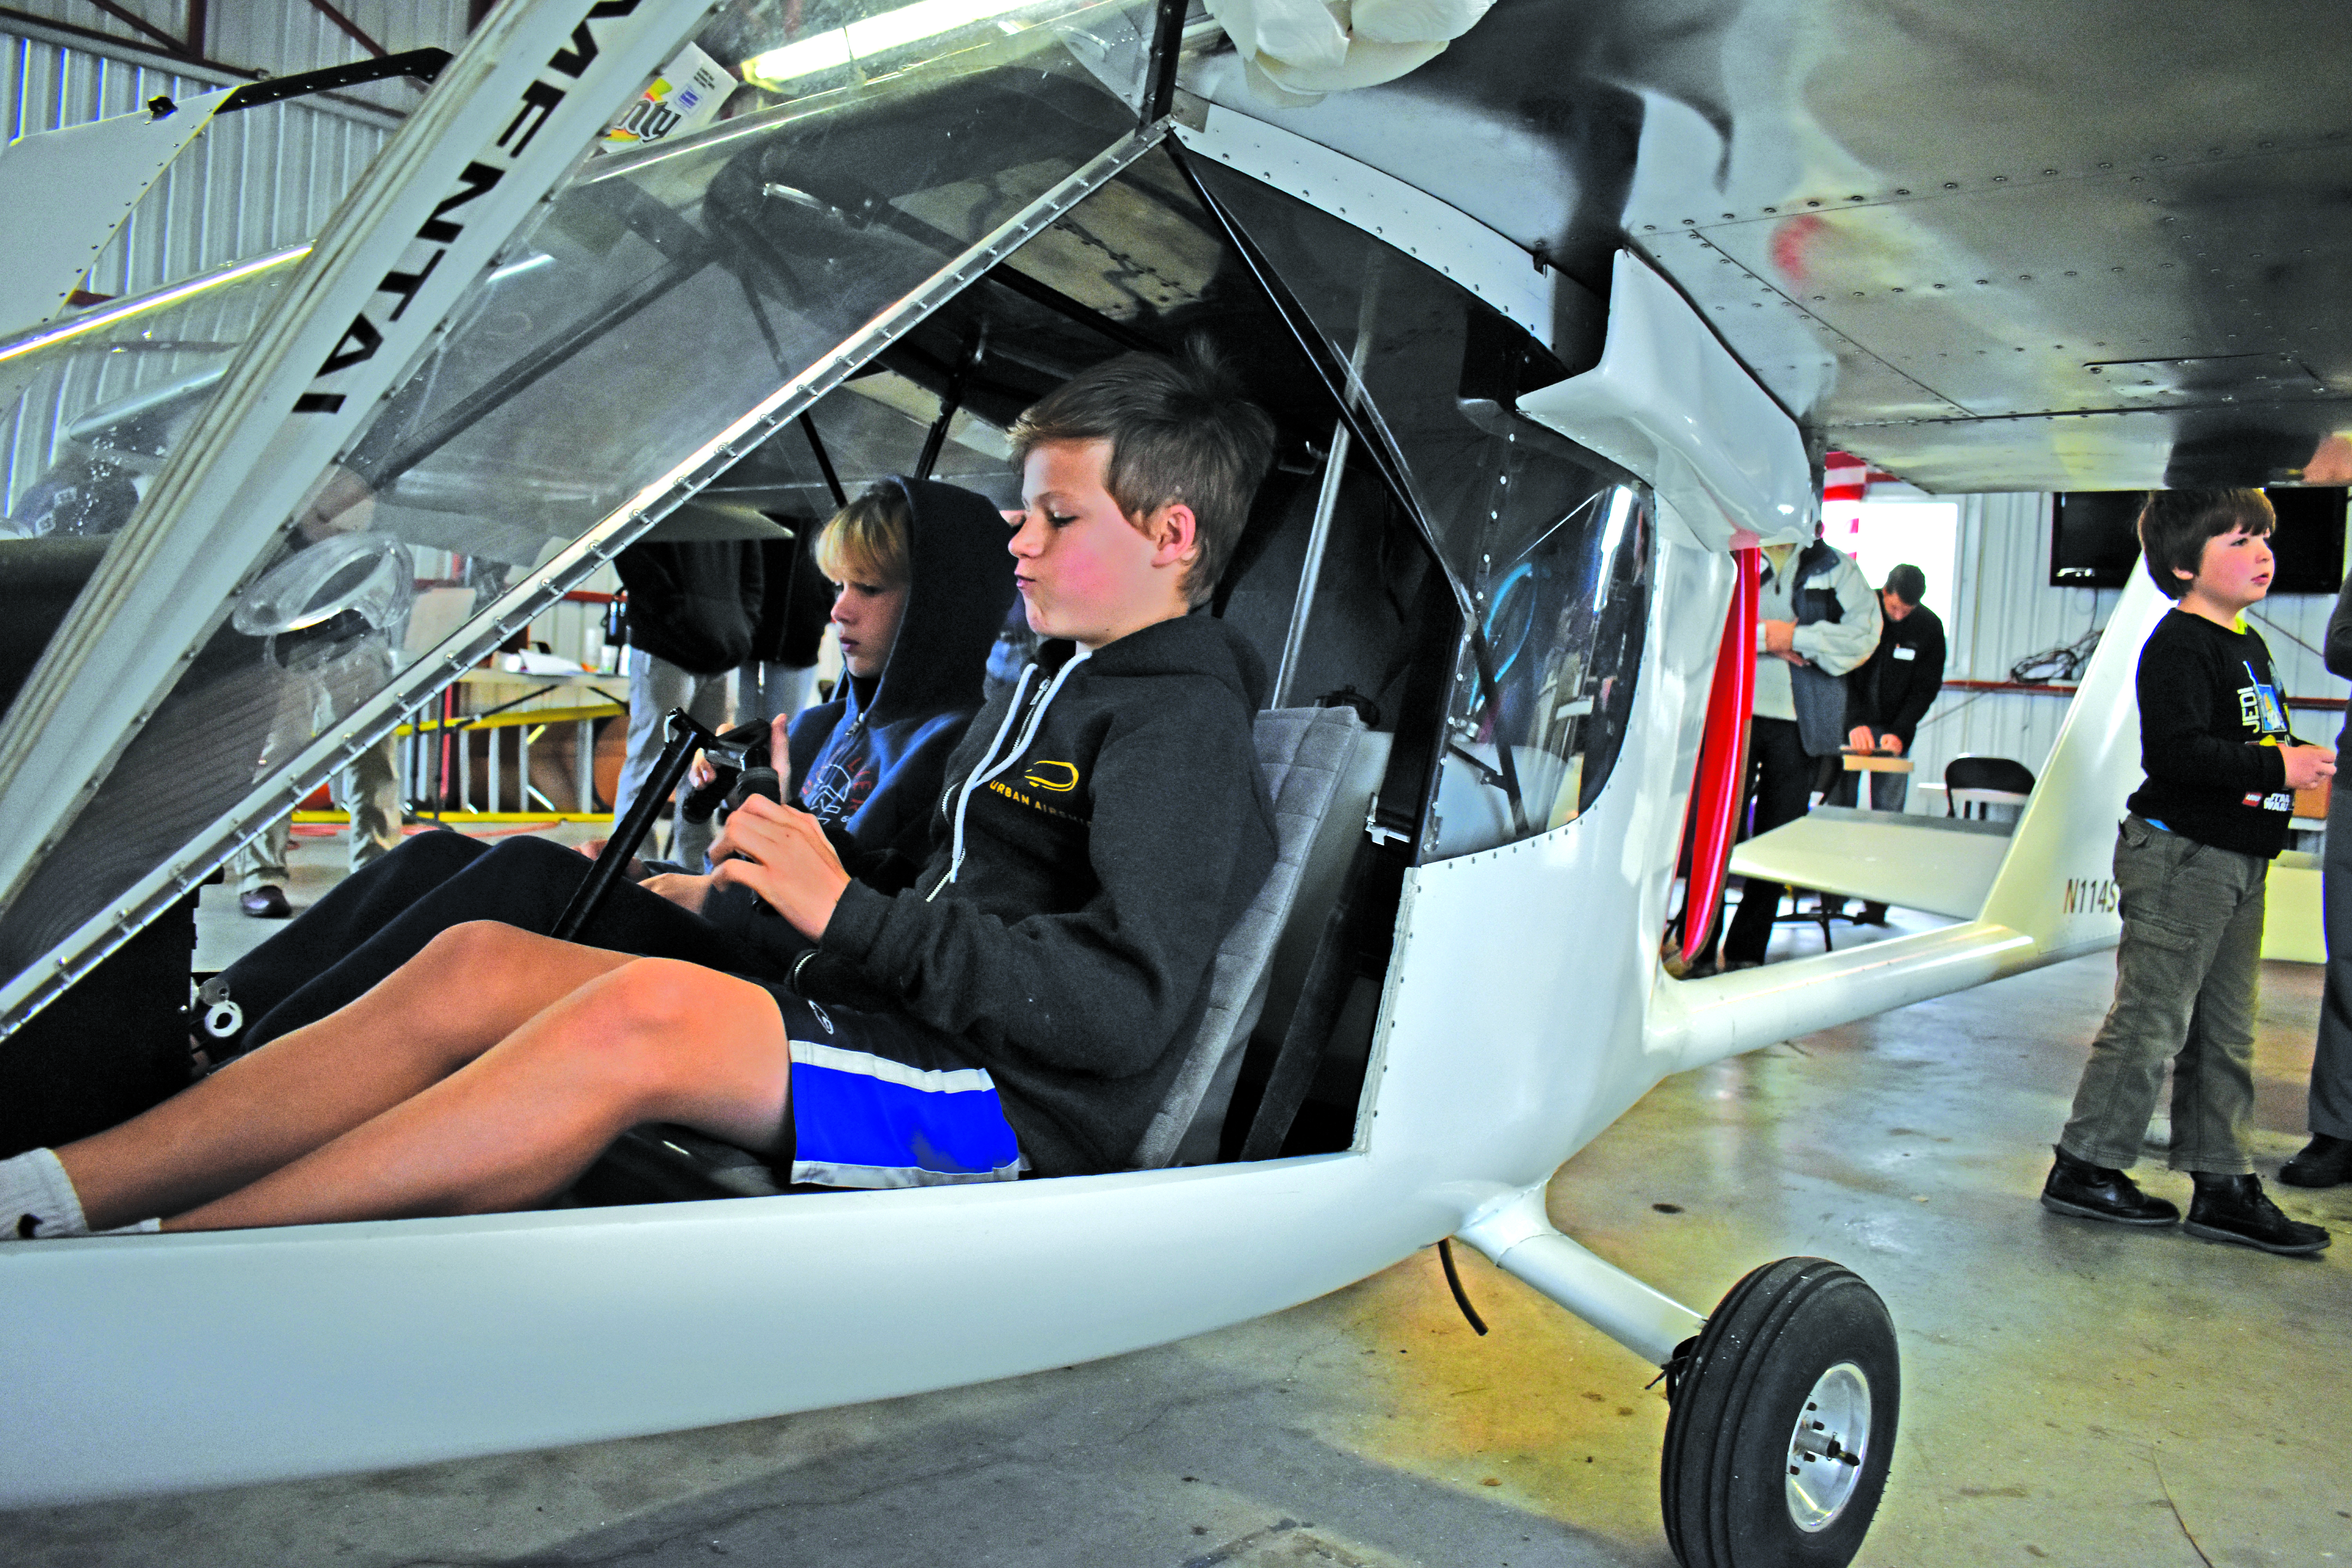 Local pilots pave runway for students’ dreams of flying